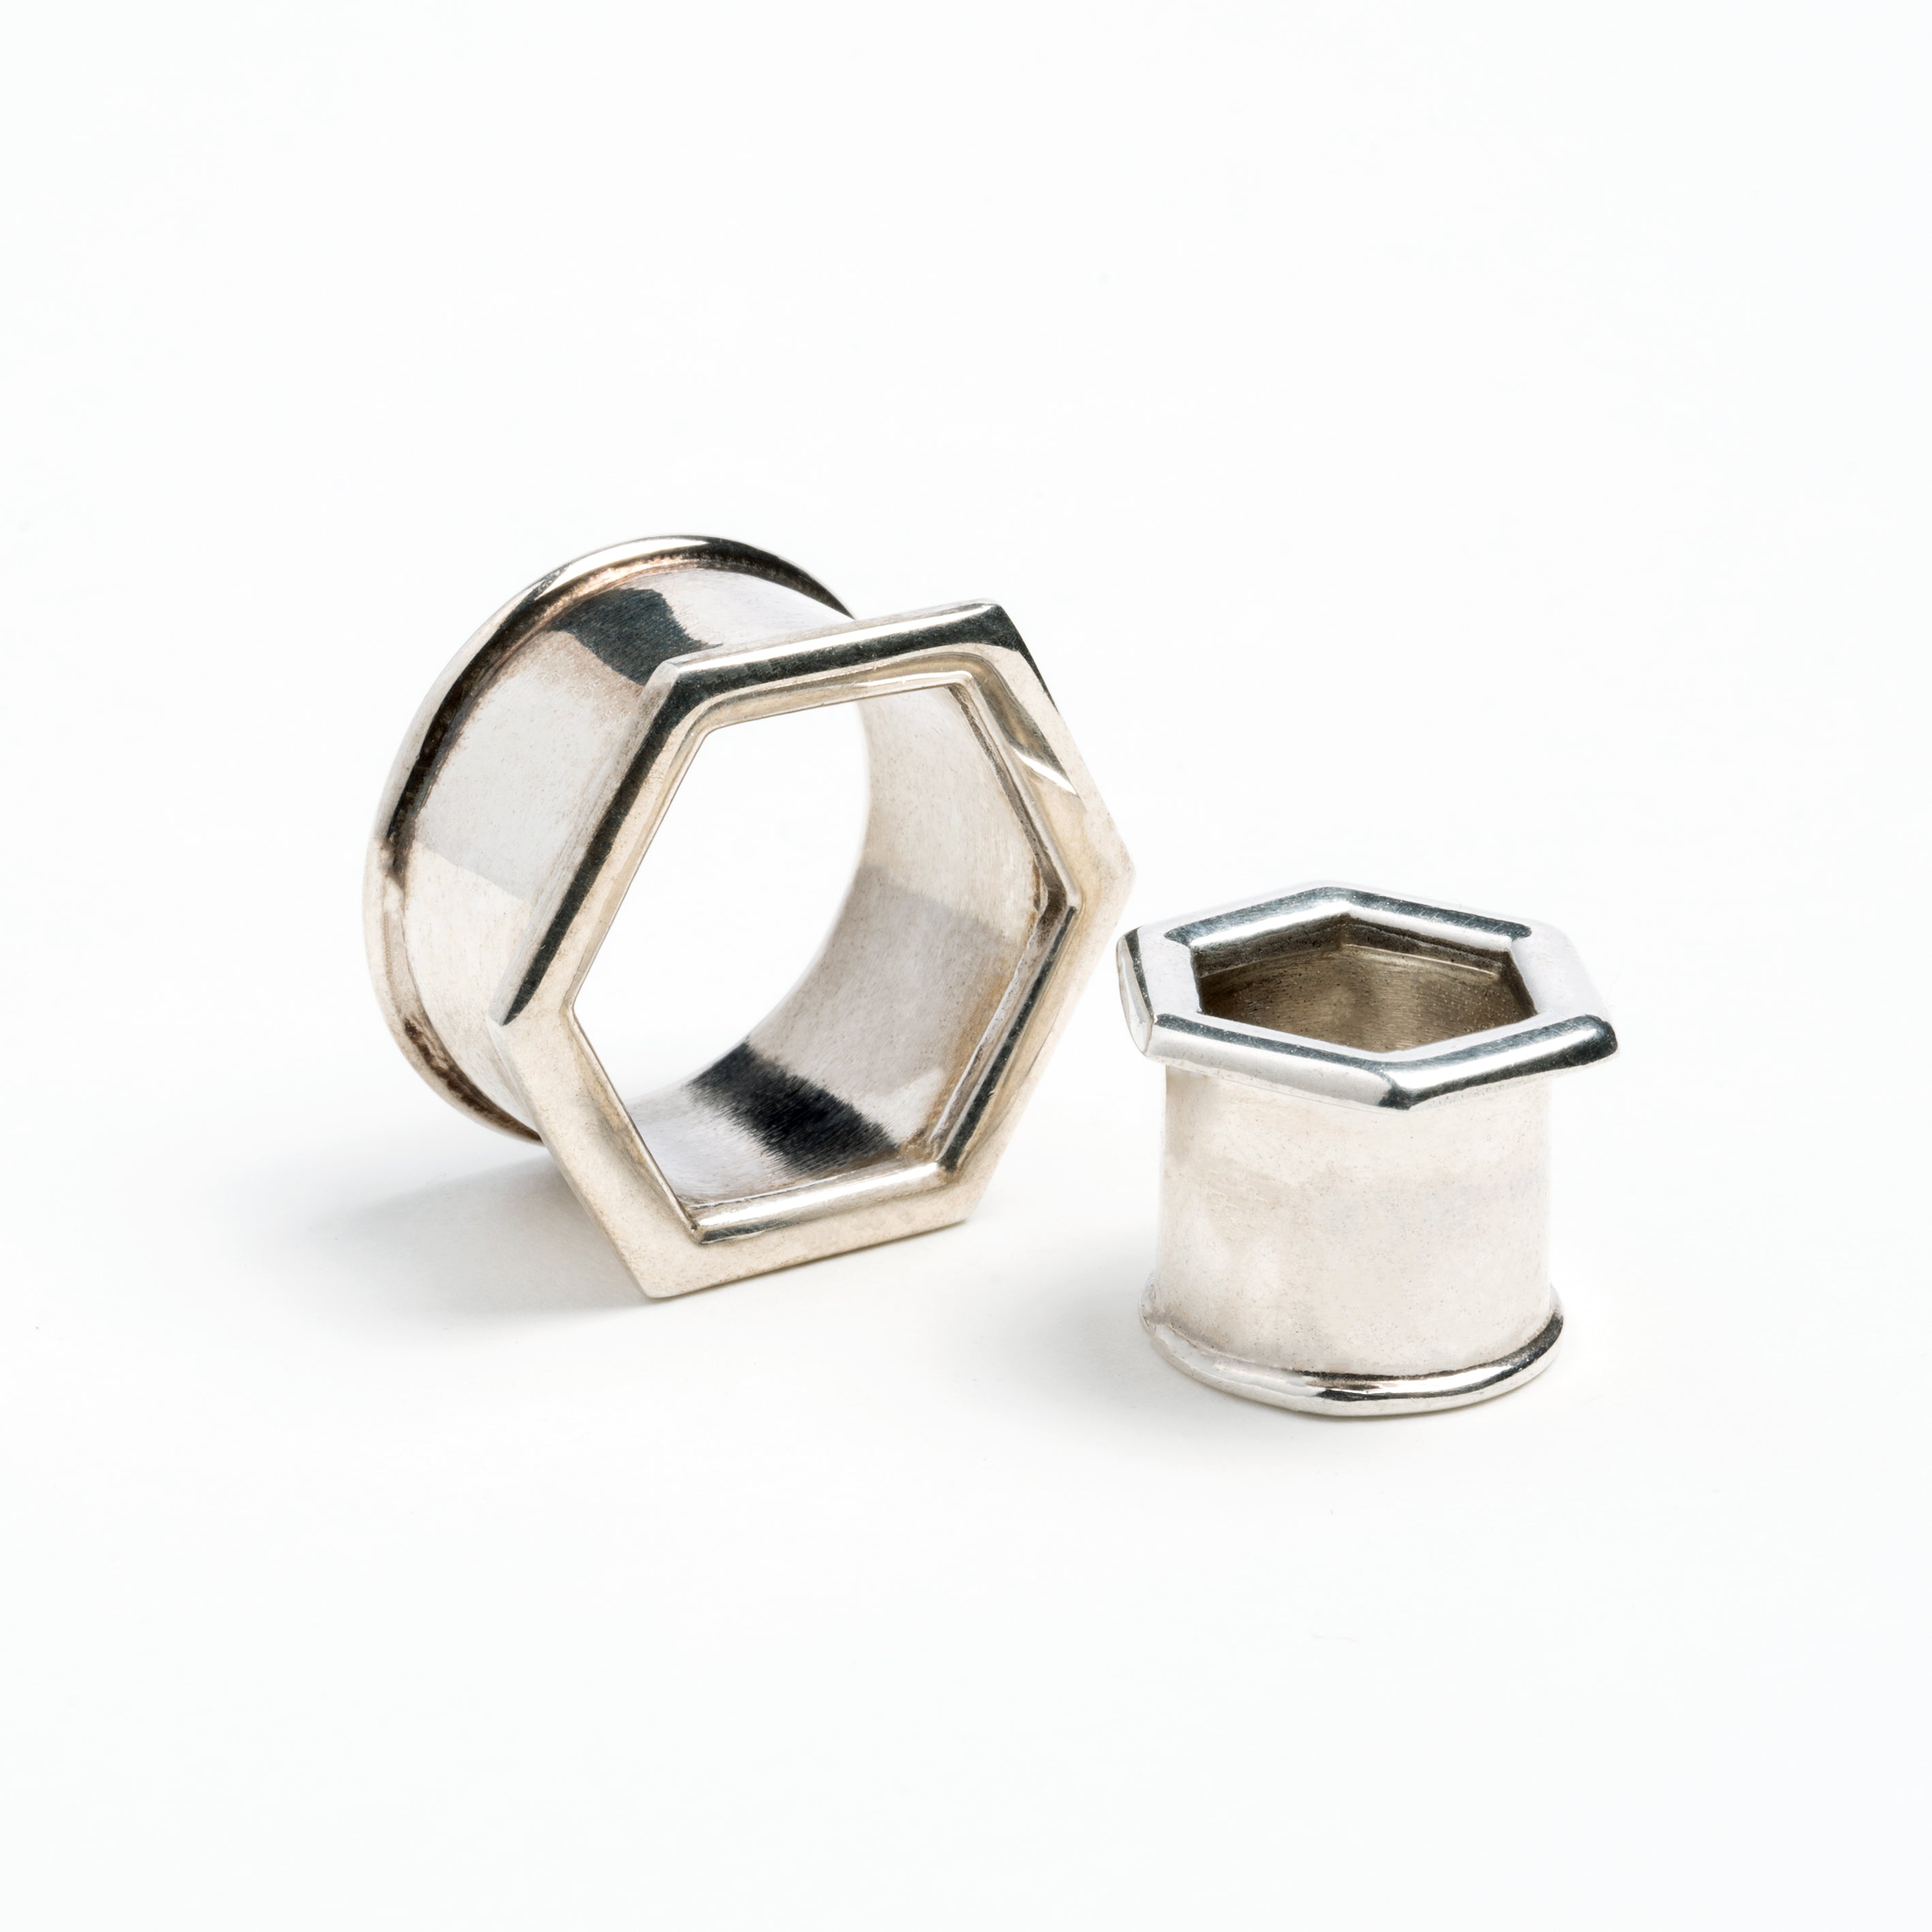 two sizes of hexagon ear tunnels front and side view 